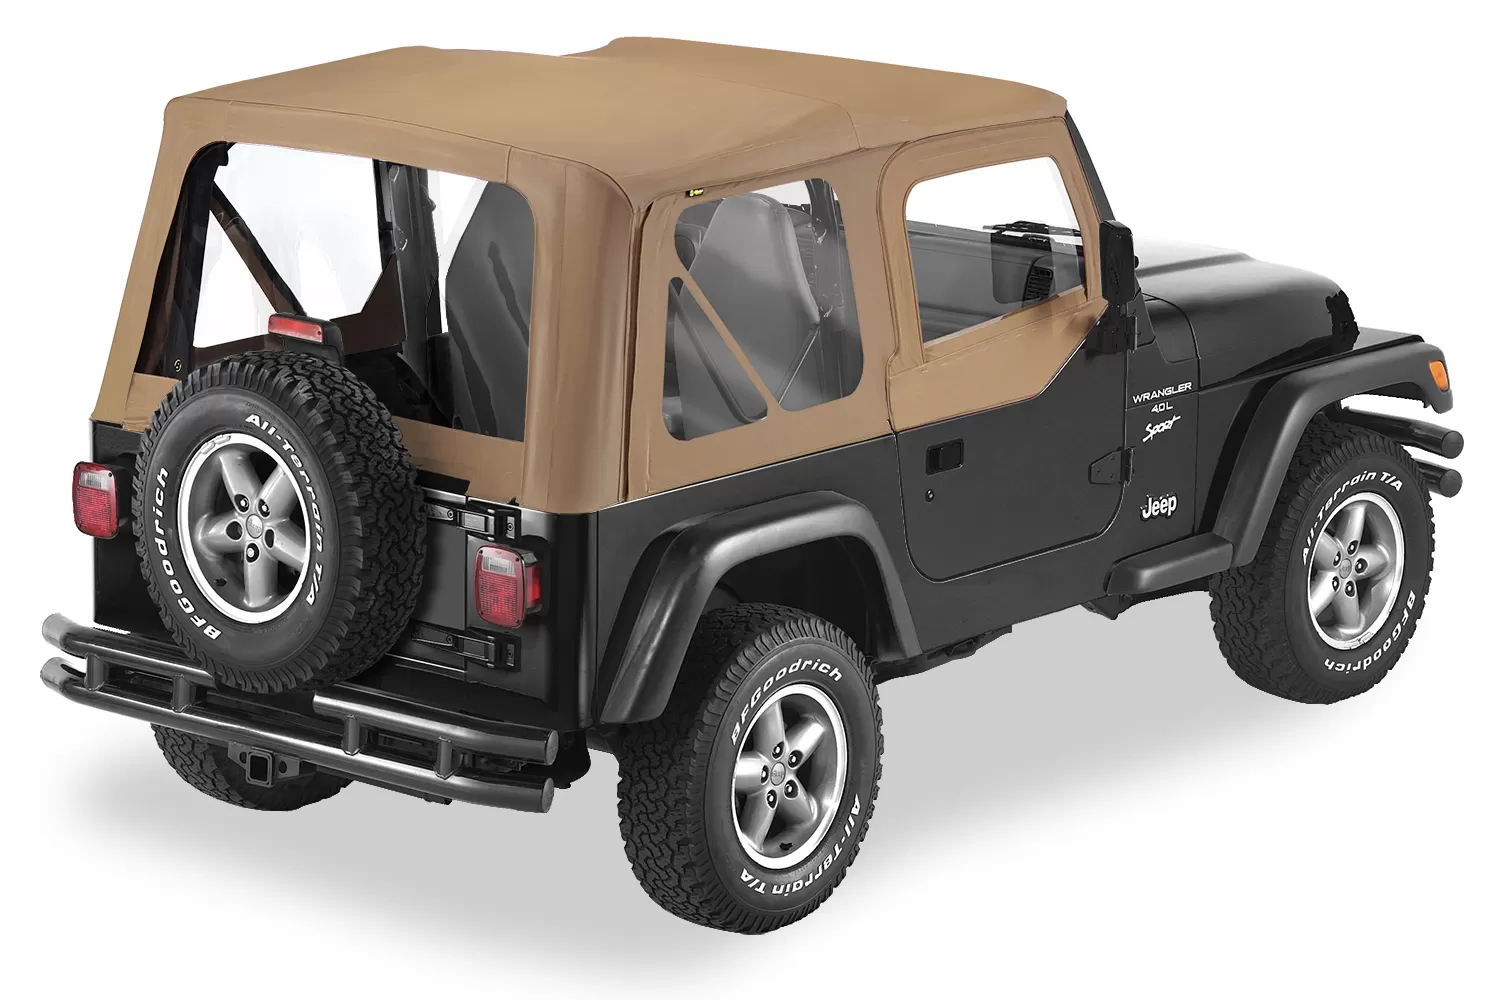 Bestop Spice Sailcloth Replace-a-Top Clear Windows w/ Upper Door Skins Jeep Wrangler 1997-2002 - 79121-37